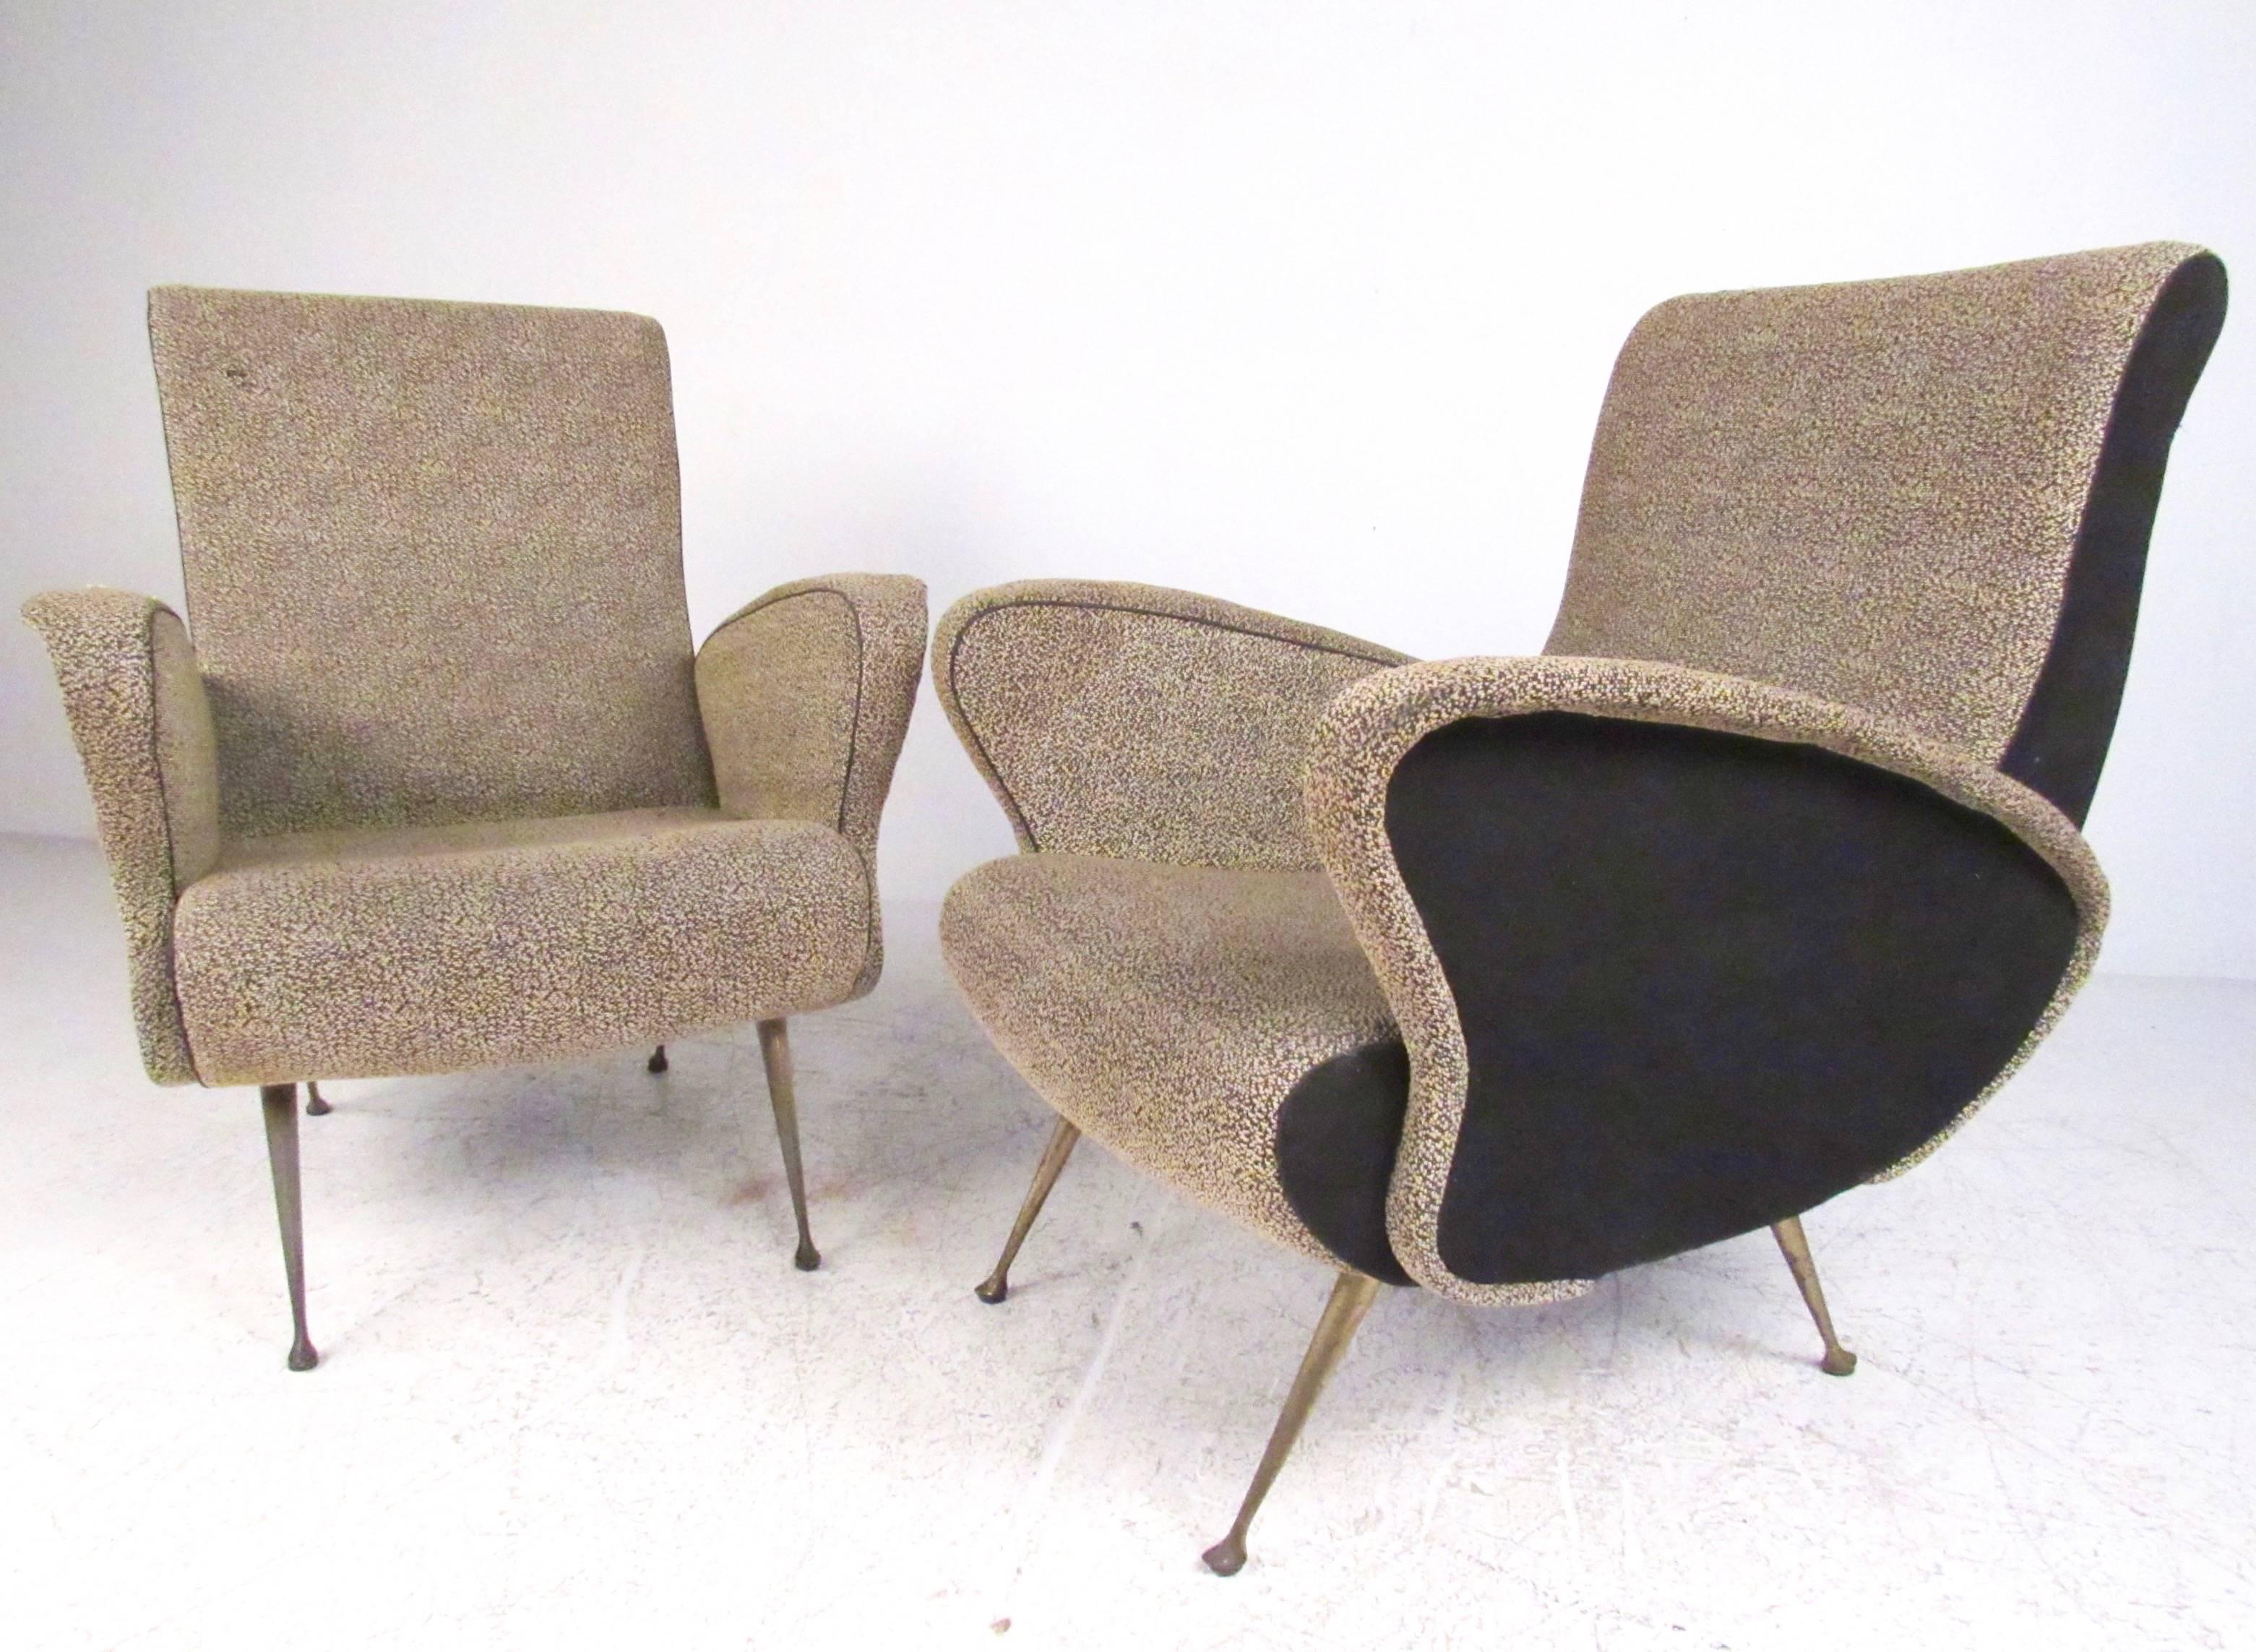 This stylish pair of Italian modern lounge chairs feature sculpted frames with vintage upholstery and unique tapered brass legs. Two-tone fabric adds to the stylish lines of this Gio Ponti style armchairs. Please confirm item location (NY or NJ).